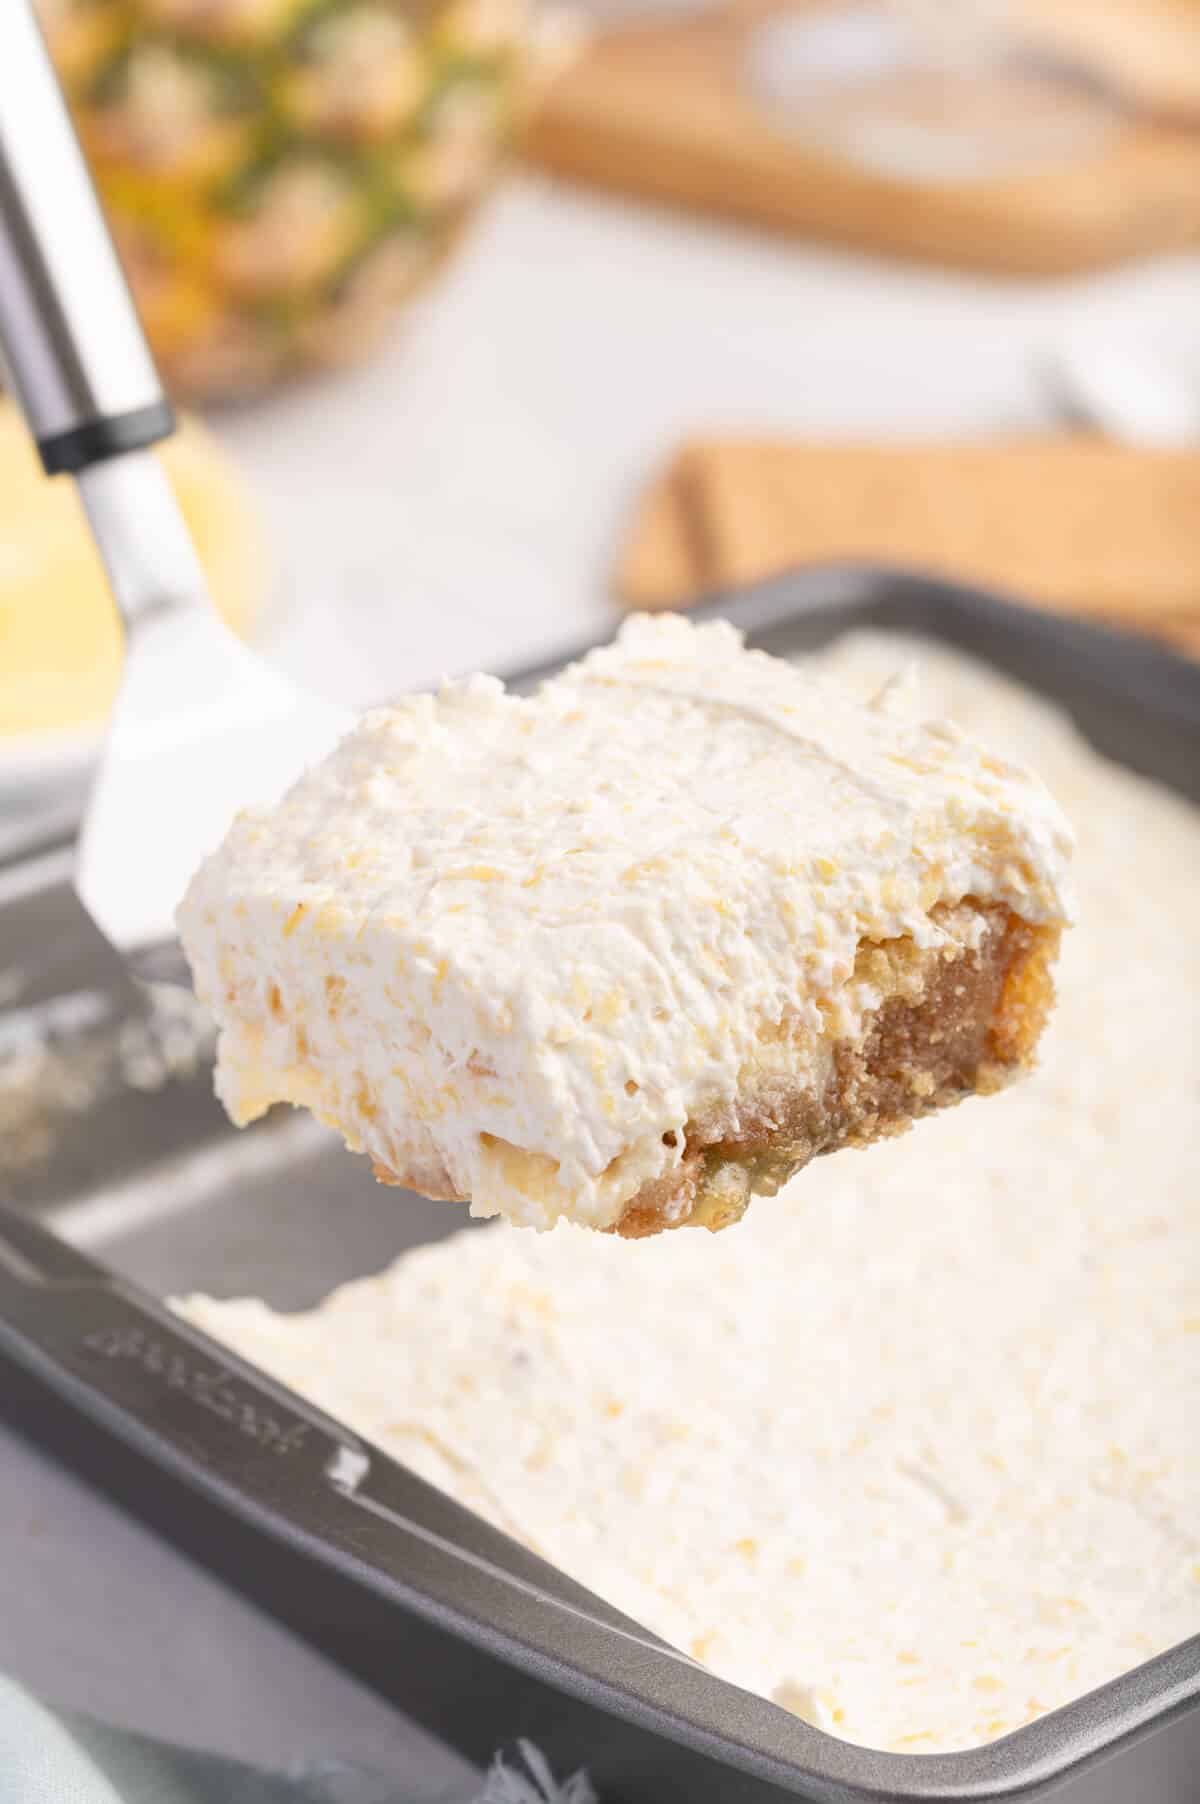 A slice of pineapple delight on a spatula.